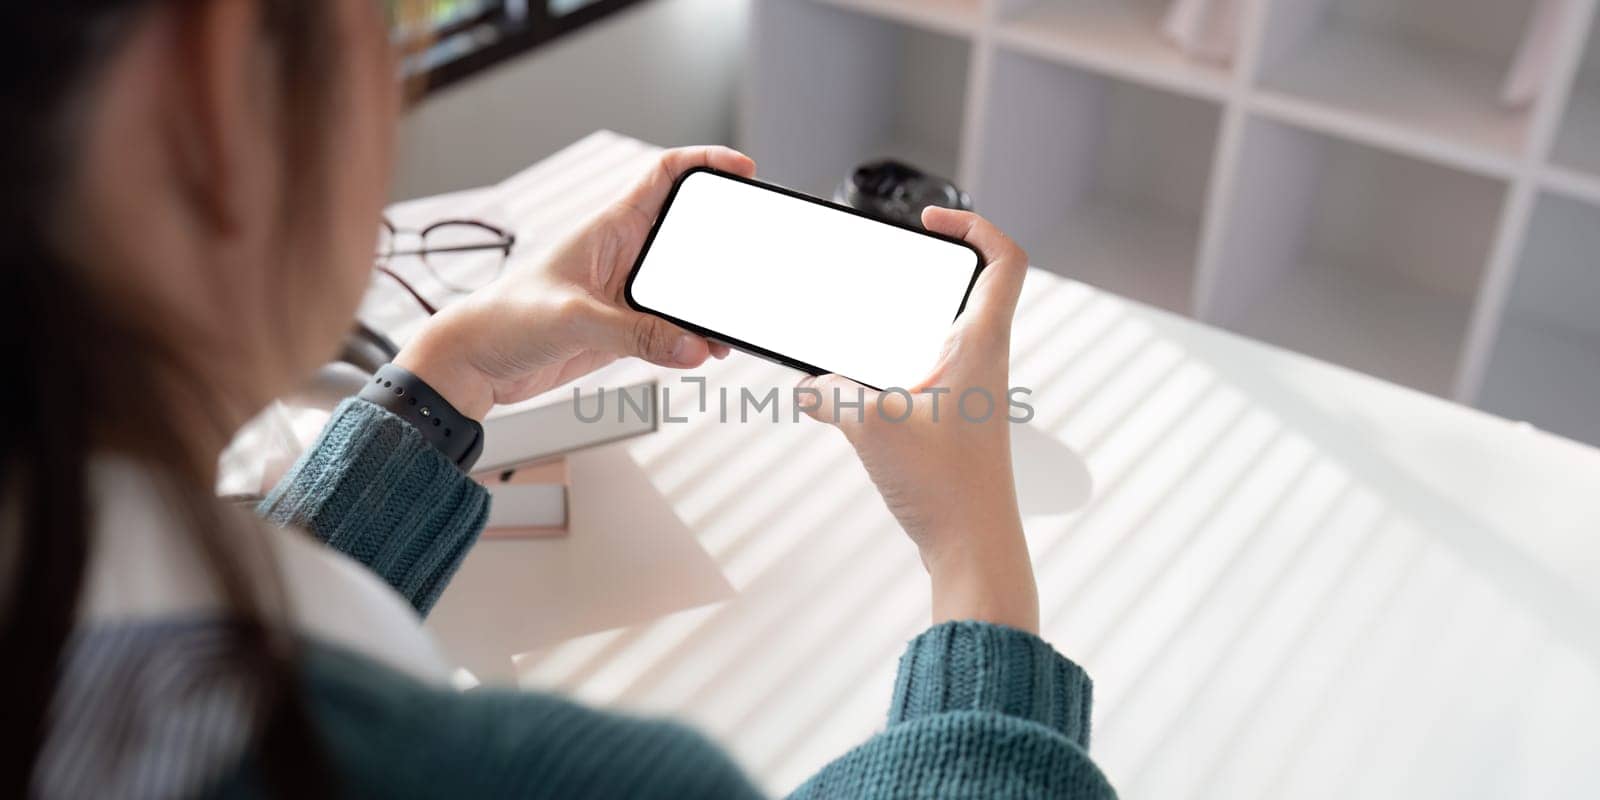 Mobile phone display blank white screen mockup. woman hand holding smartphone with horizontal for advertisement.